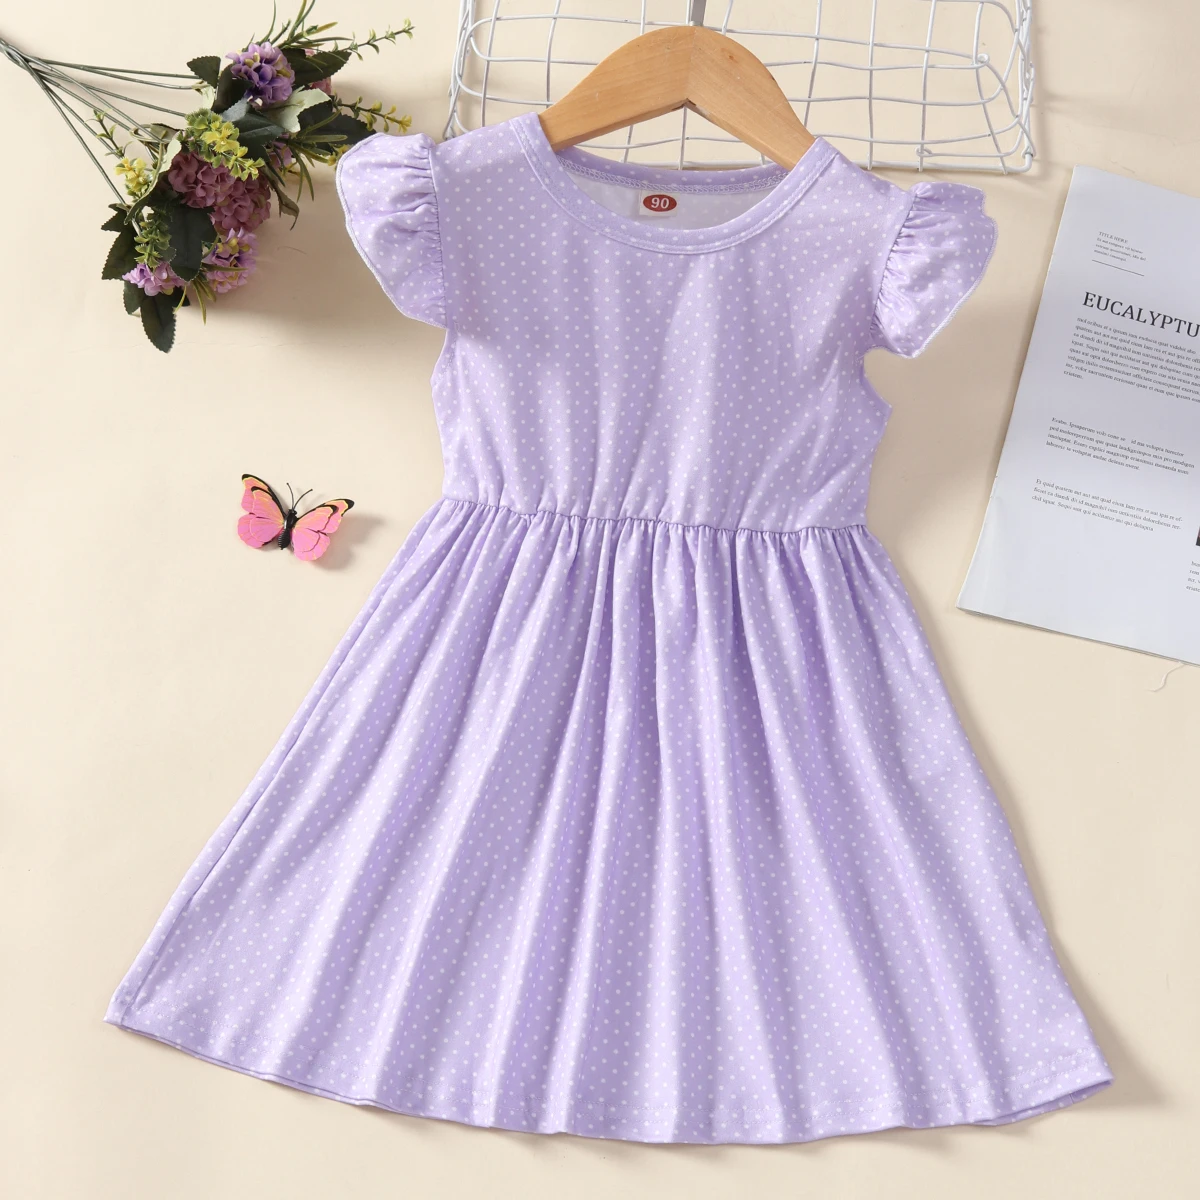 

Summer Dress for Girls Lovely Dot Cute Flying Sleeve Kids Dresses Cotton Ruffles New Toddler Girl Clothes 1-7Y